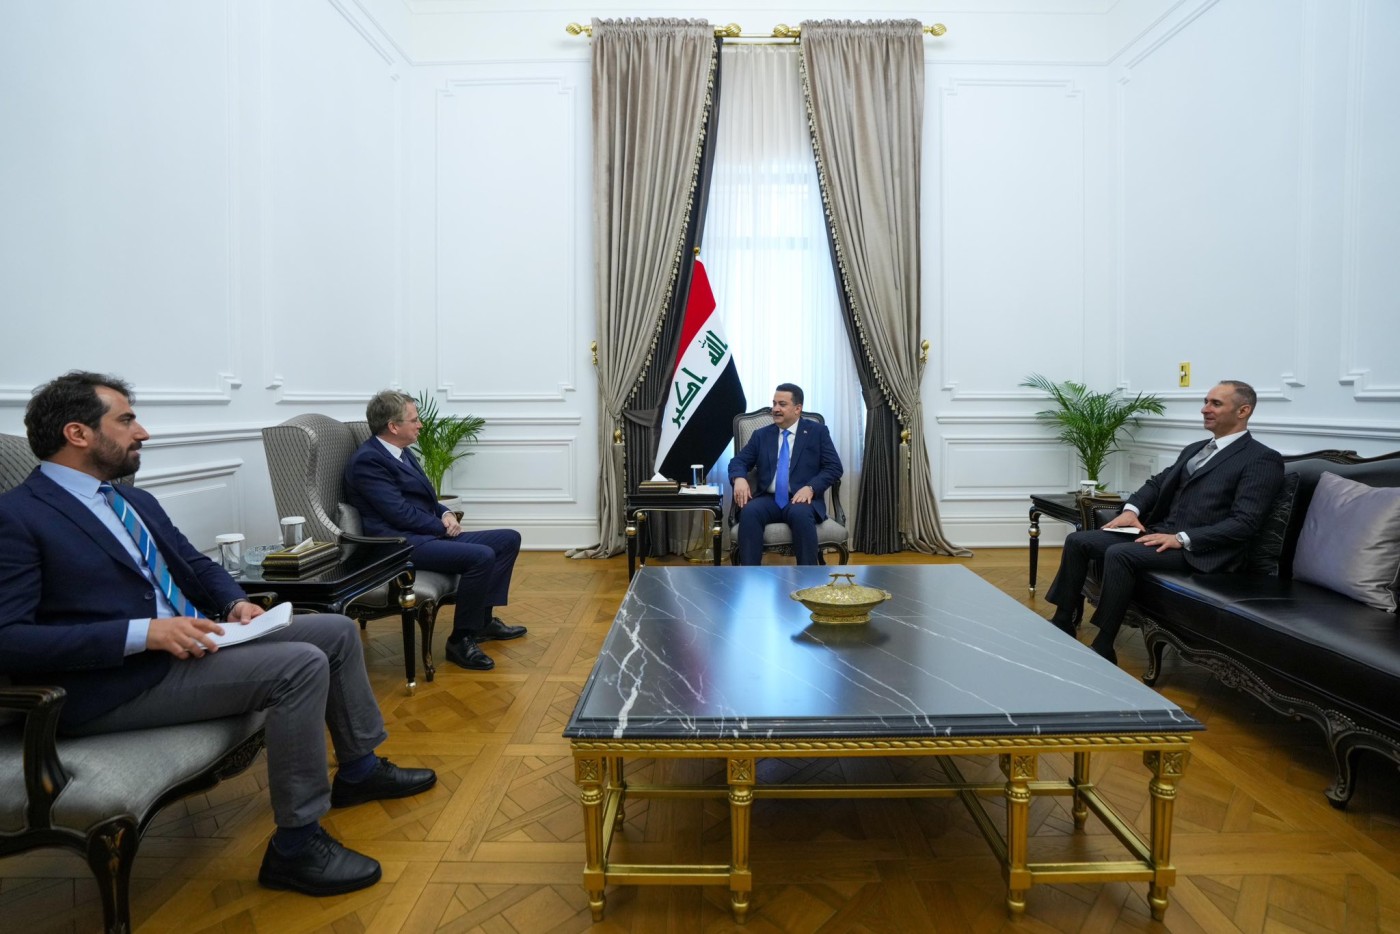 Image of Iraq open to partner with French companies, develop defense capabilities: PM Sudani